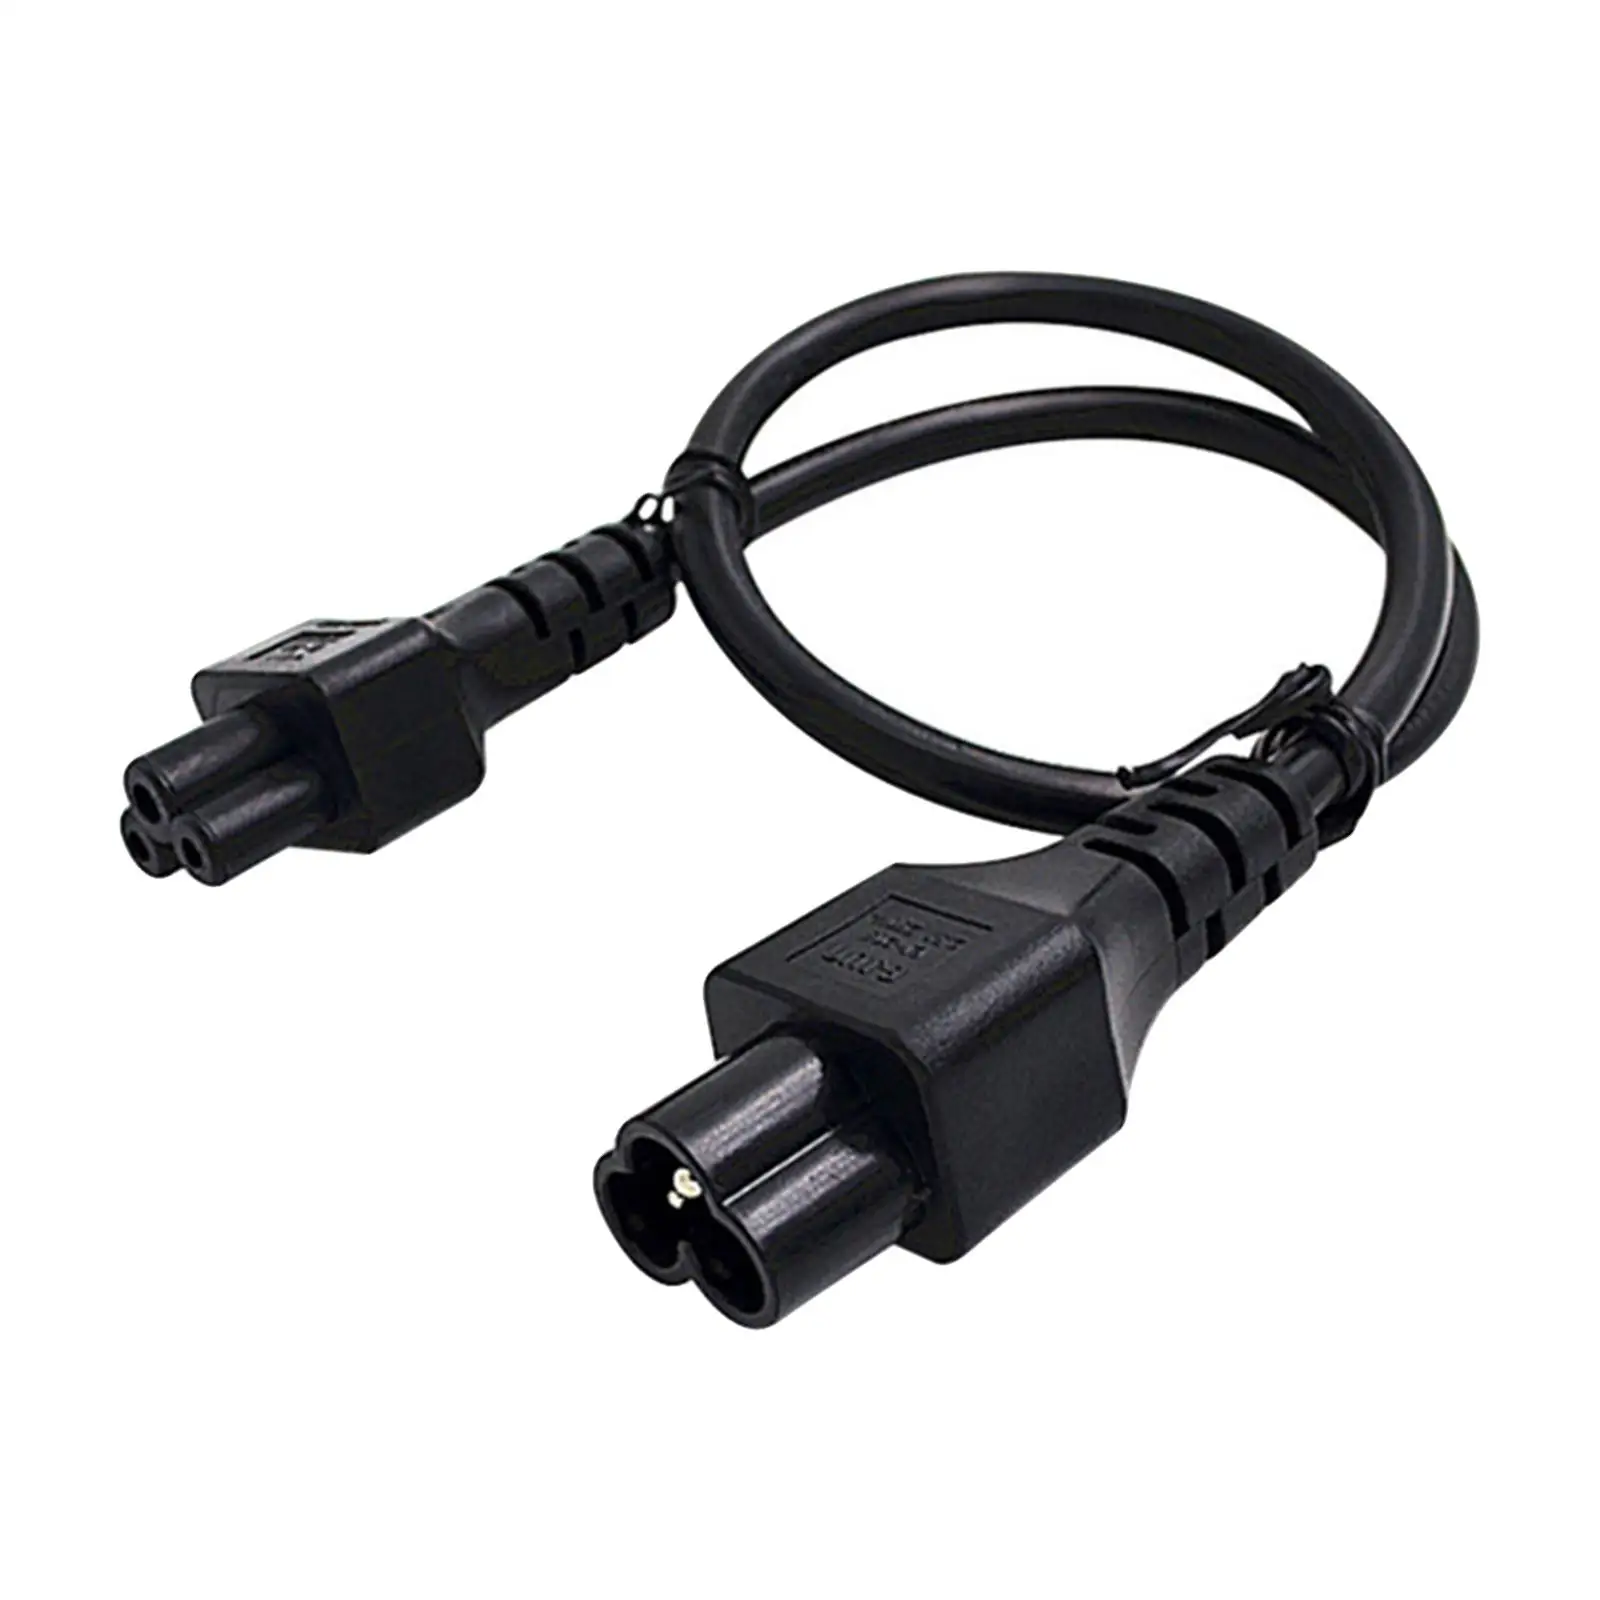 C6 to C5 PC Power Cord Cable 2ft/0.6M Low Resistance Stable Transmission Male to Female for Computer Notebook Scanner Laptop